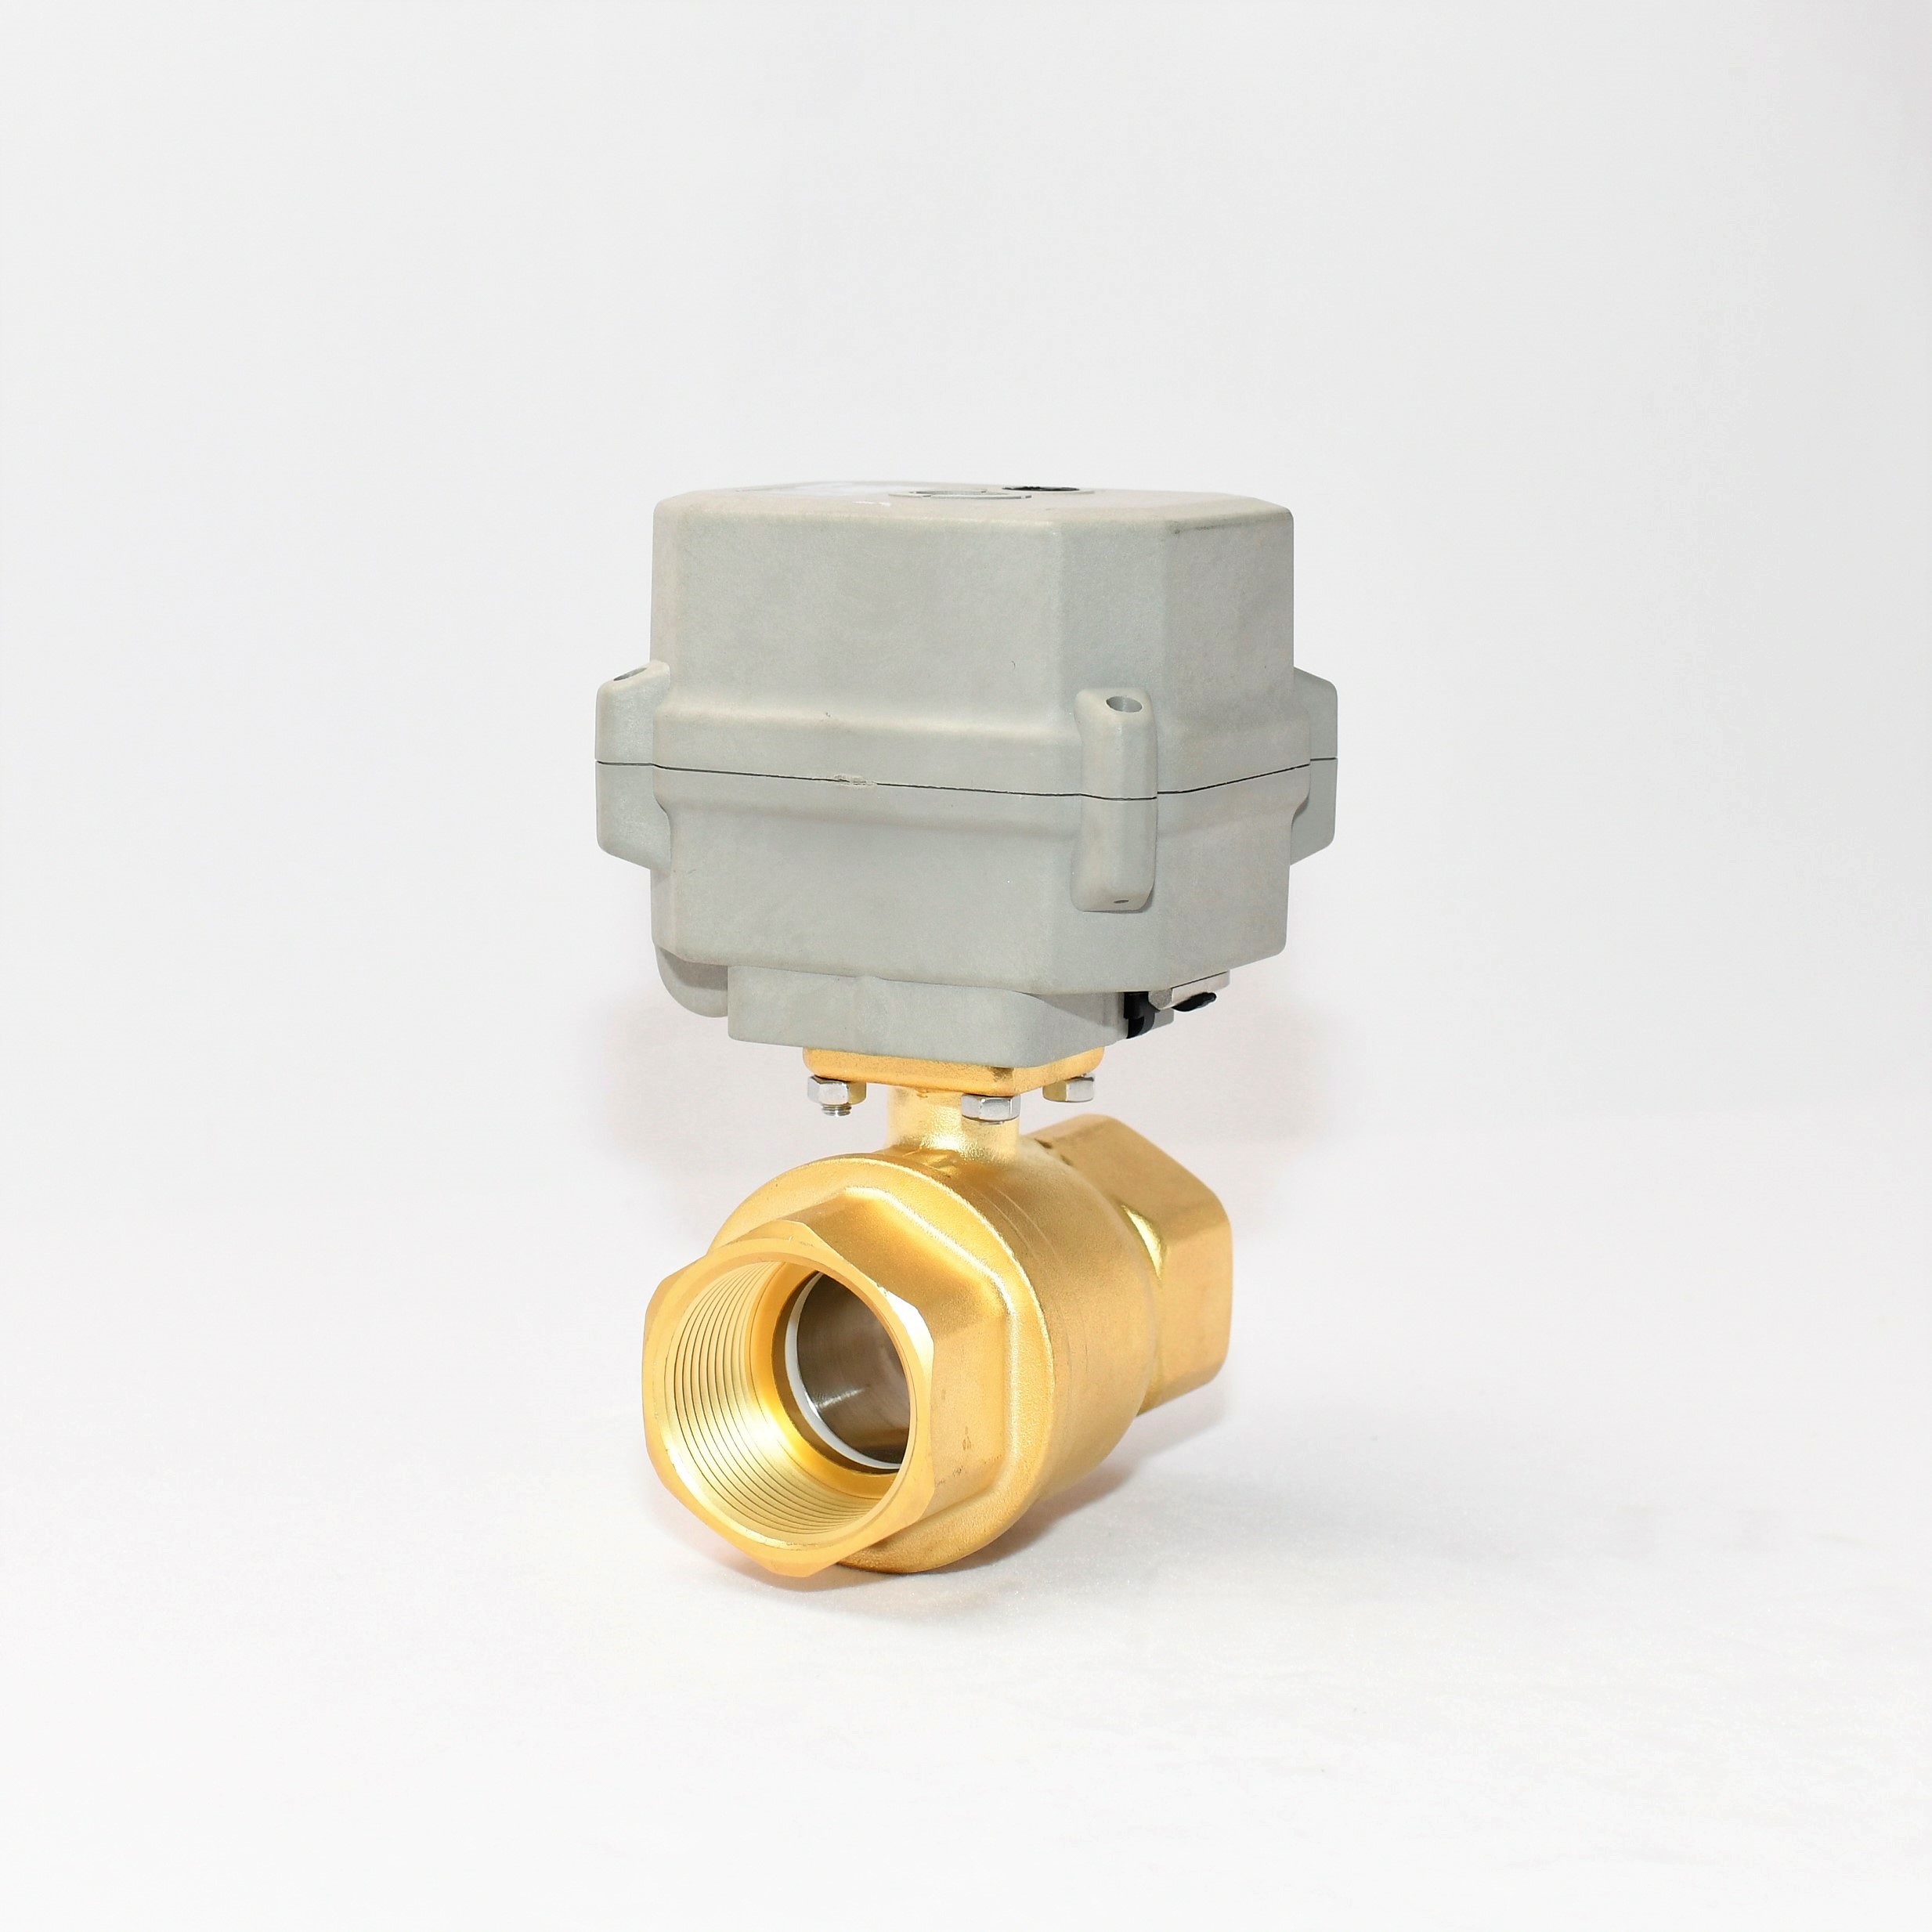 BACOENG 1 DN25 Brass BSP 2 Port Motorized Ball Valve AC110-230V CR202 2 Wires Normally Closed Electric Ball Valve 